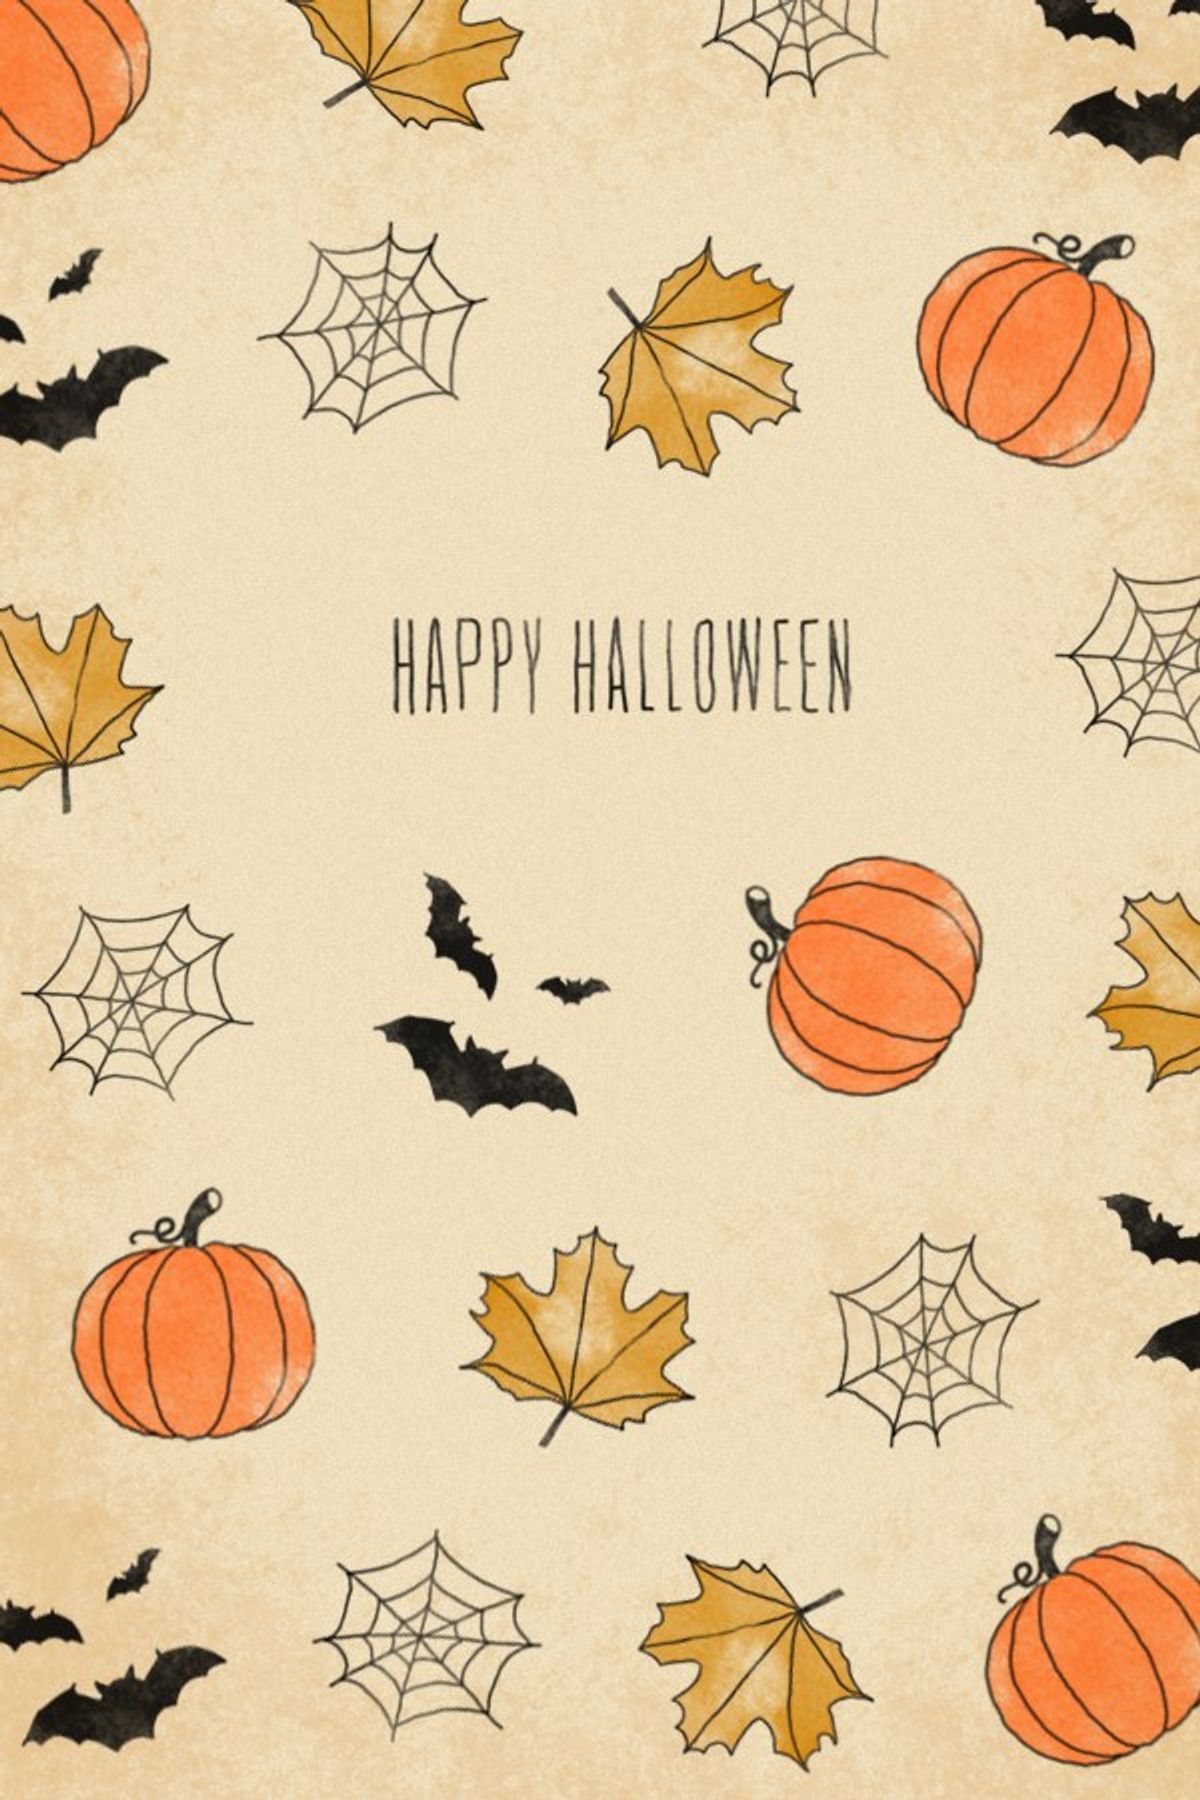 5 Reasons Halloween Will Forever Be The Best Holiday